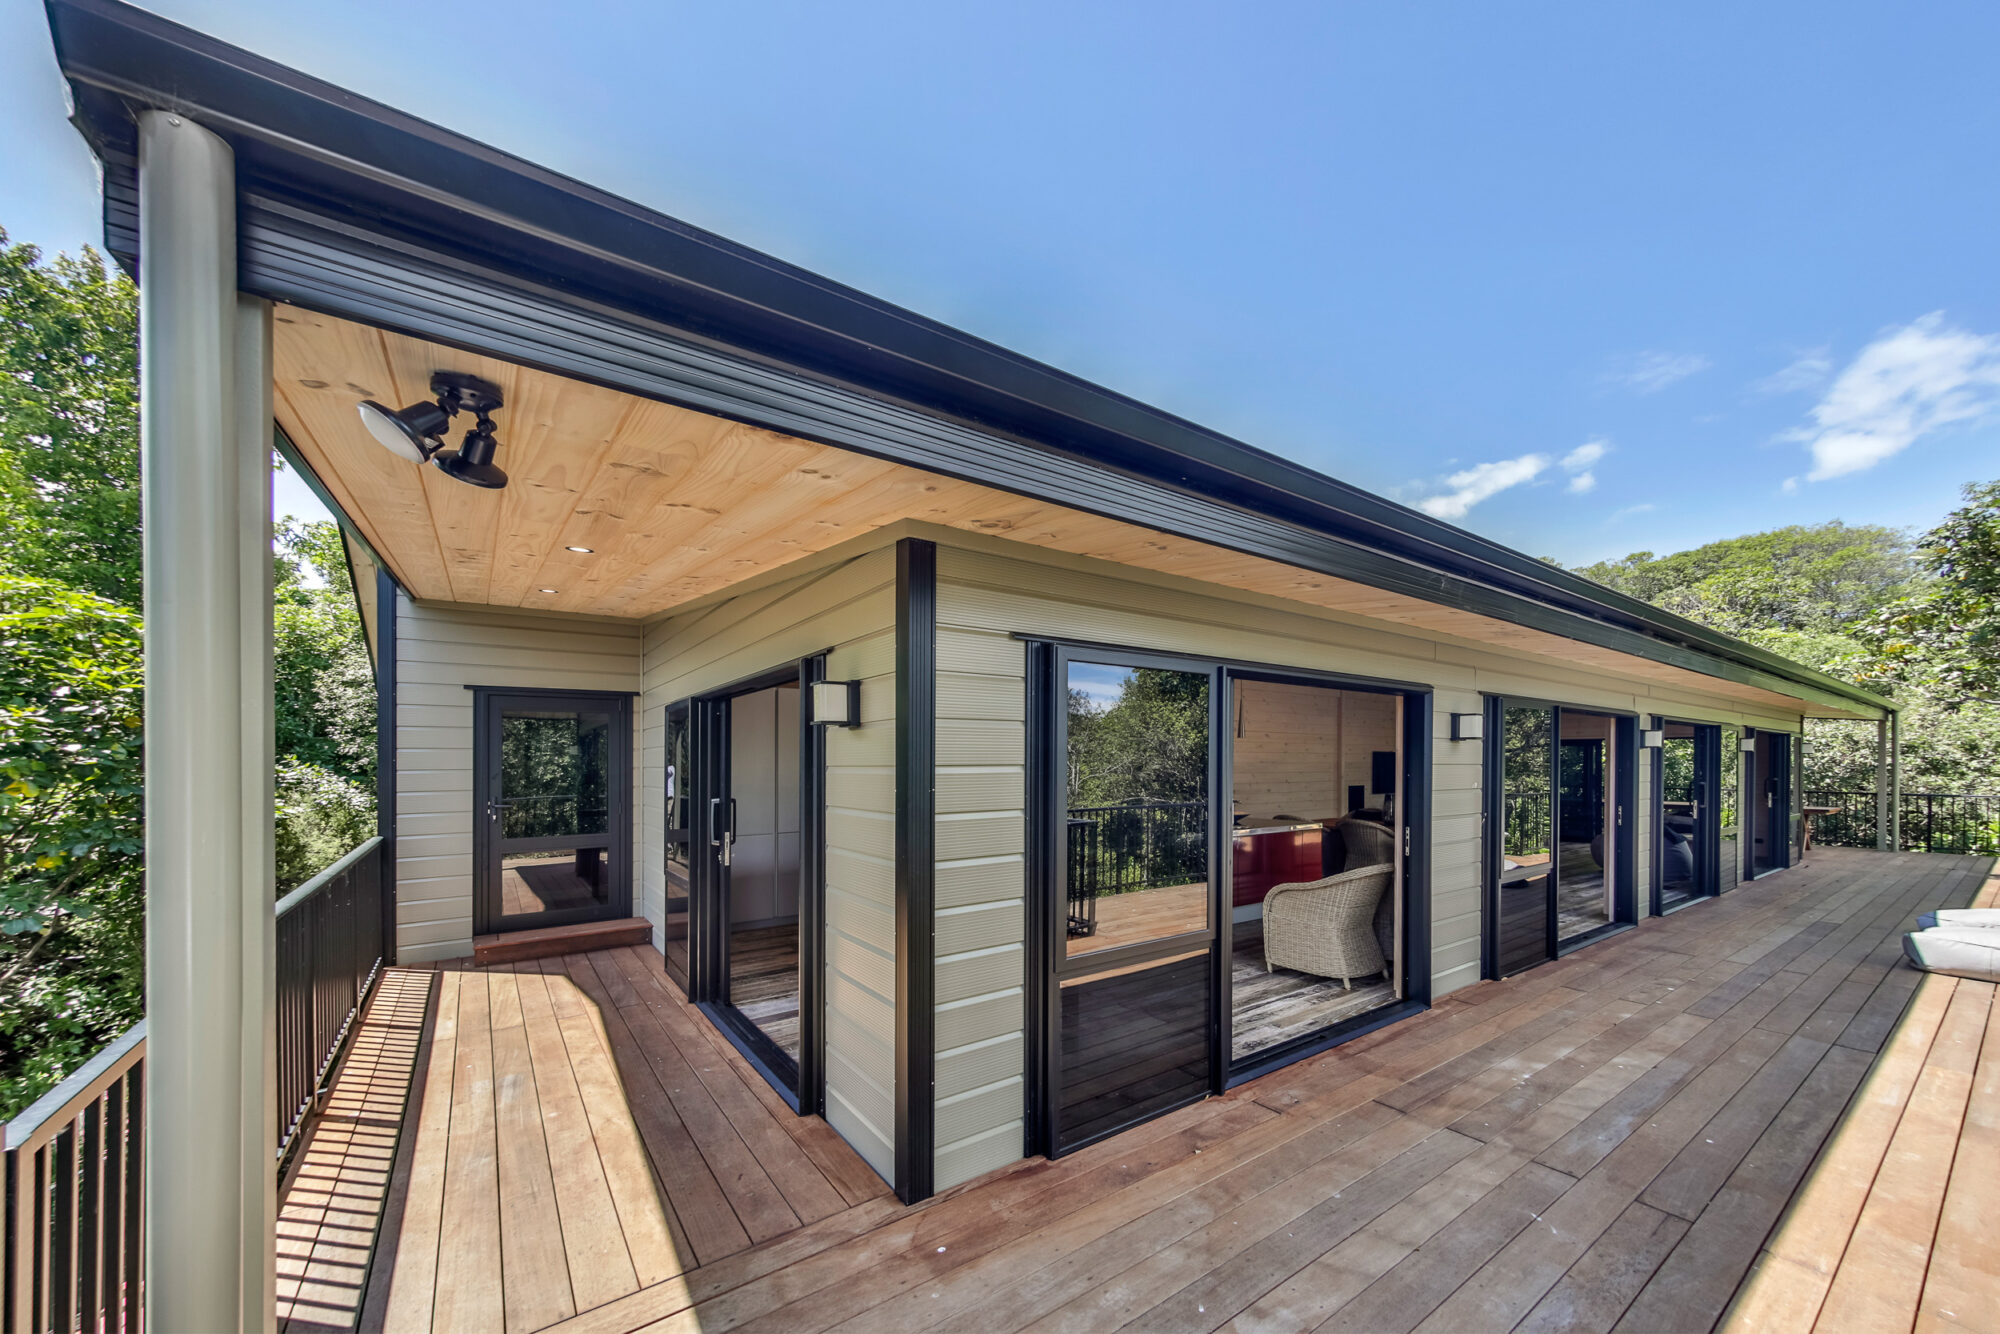 Large deck gives holiday home extra space